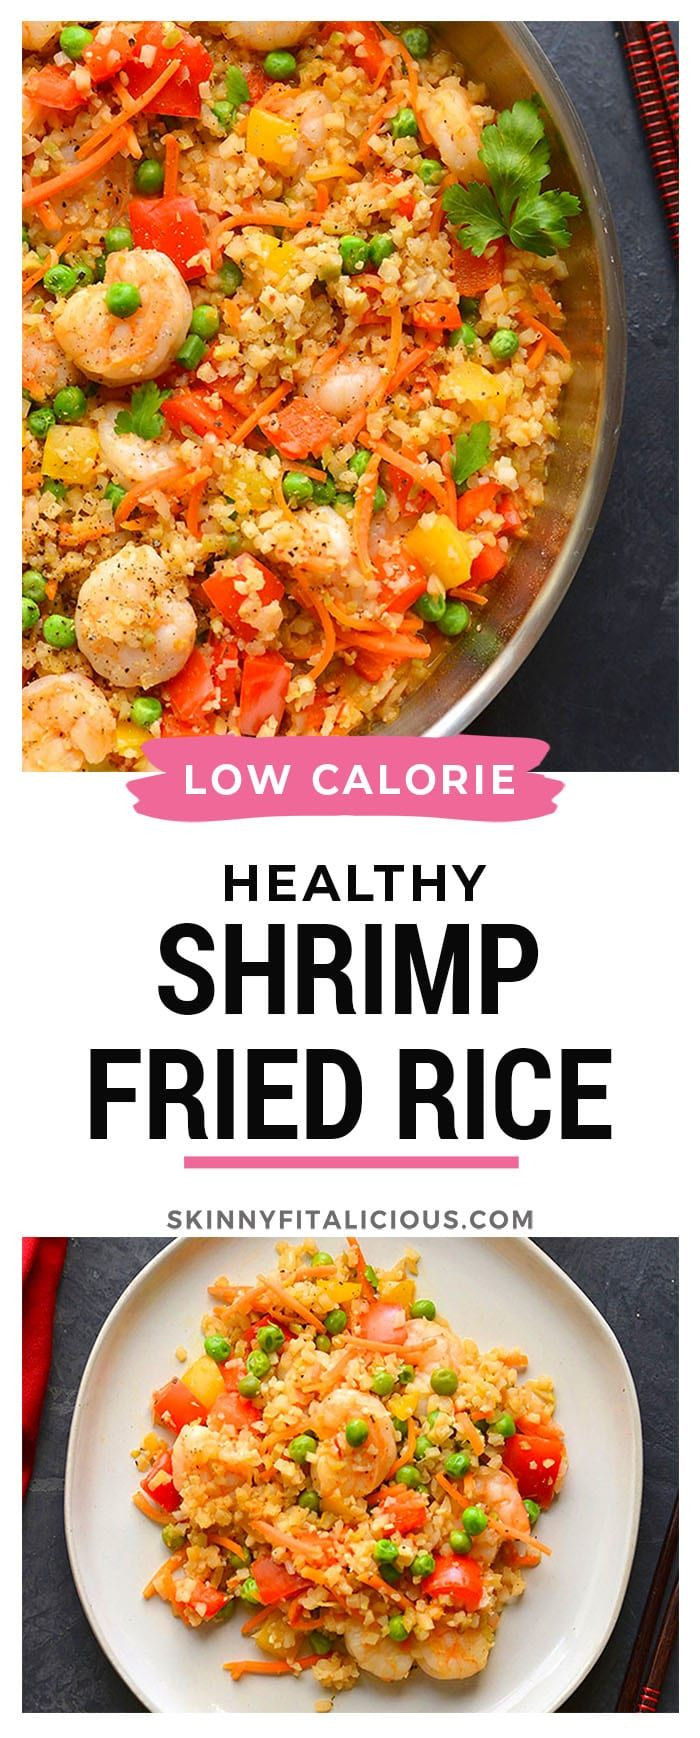 Low Calorie Fried Rice
 Healthy Shrimp Fried Rice in 2020